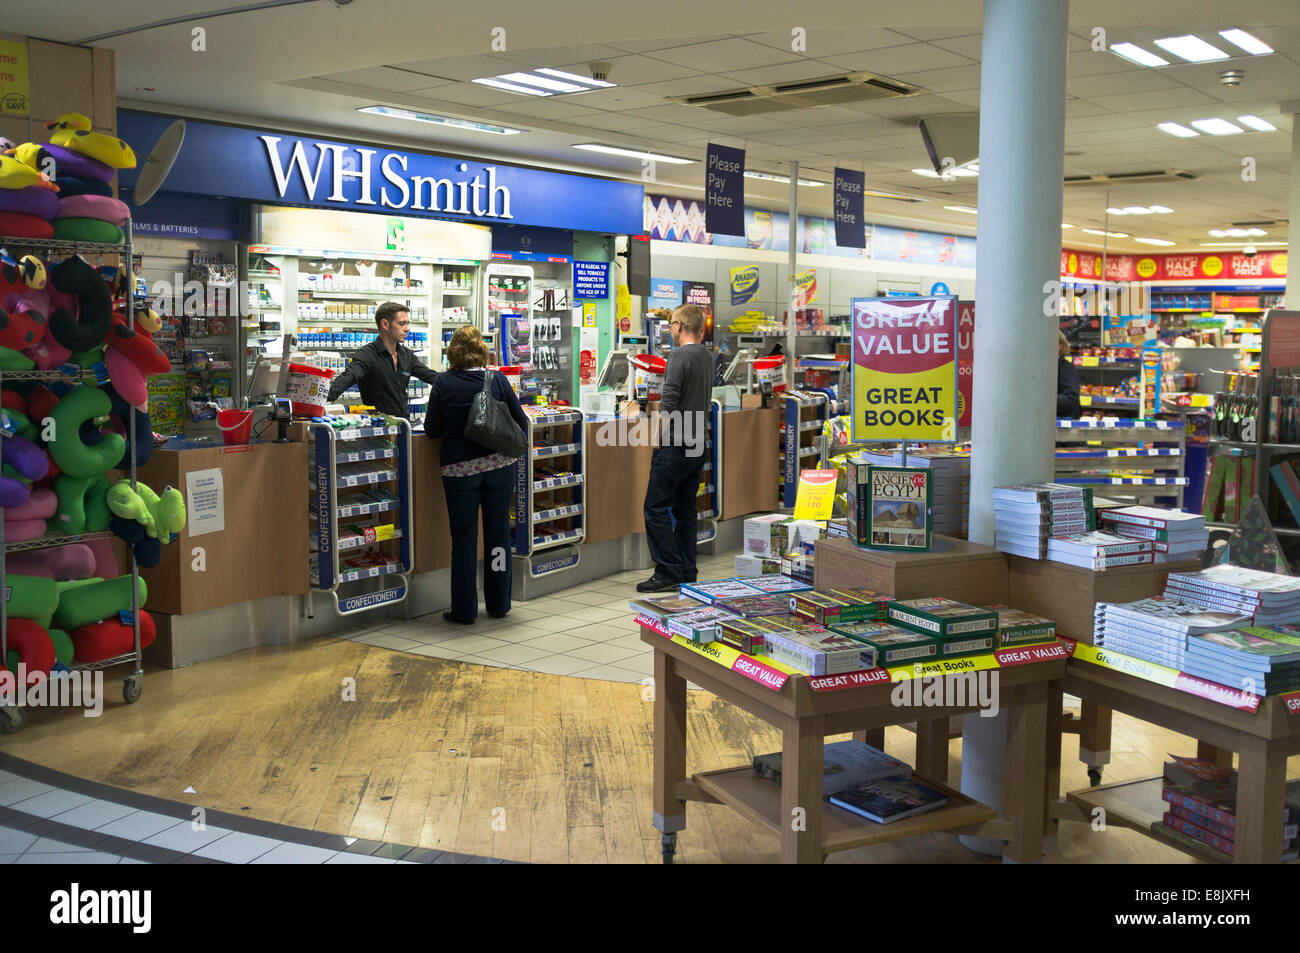 dh WH Smiths shop interior WH SMITH UK Customers whsmiths Birmingham M42 service station shop newspaper britain shopper inside store whsmith newsagent Stock Photo